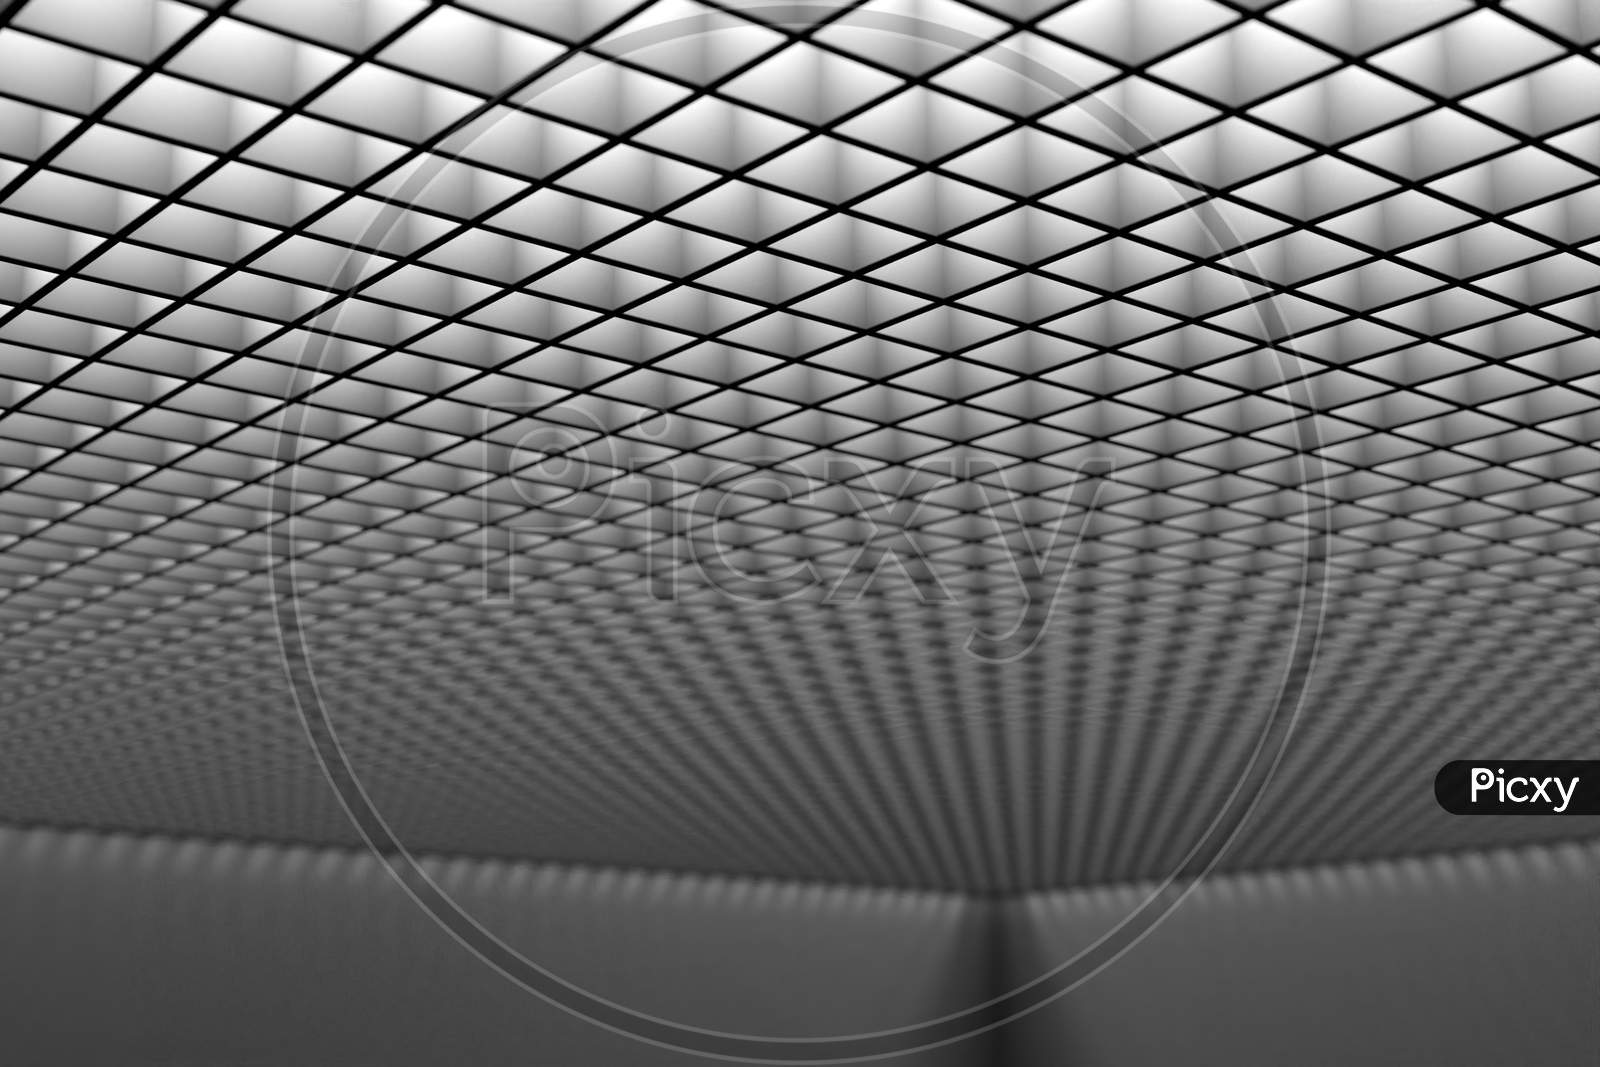 3D Illustration Gray  Pattern, Cell In Geometric Ornamental Style From Stripes . Abstract  Geometric Background, Texture  .  Unusual Ceiling